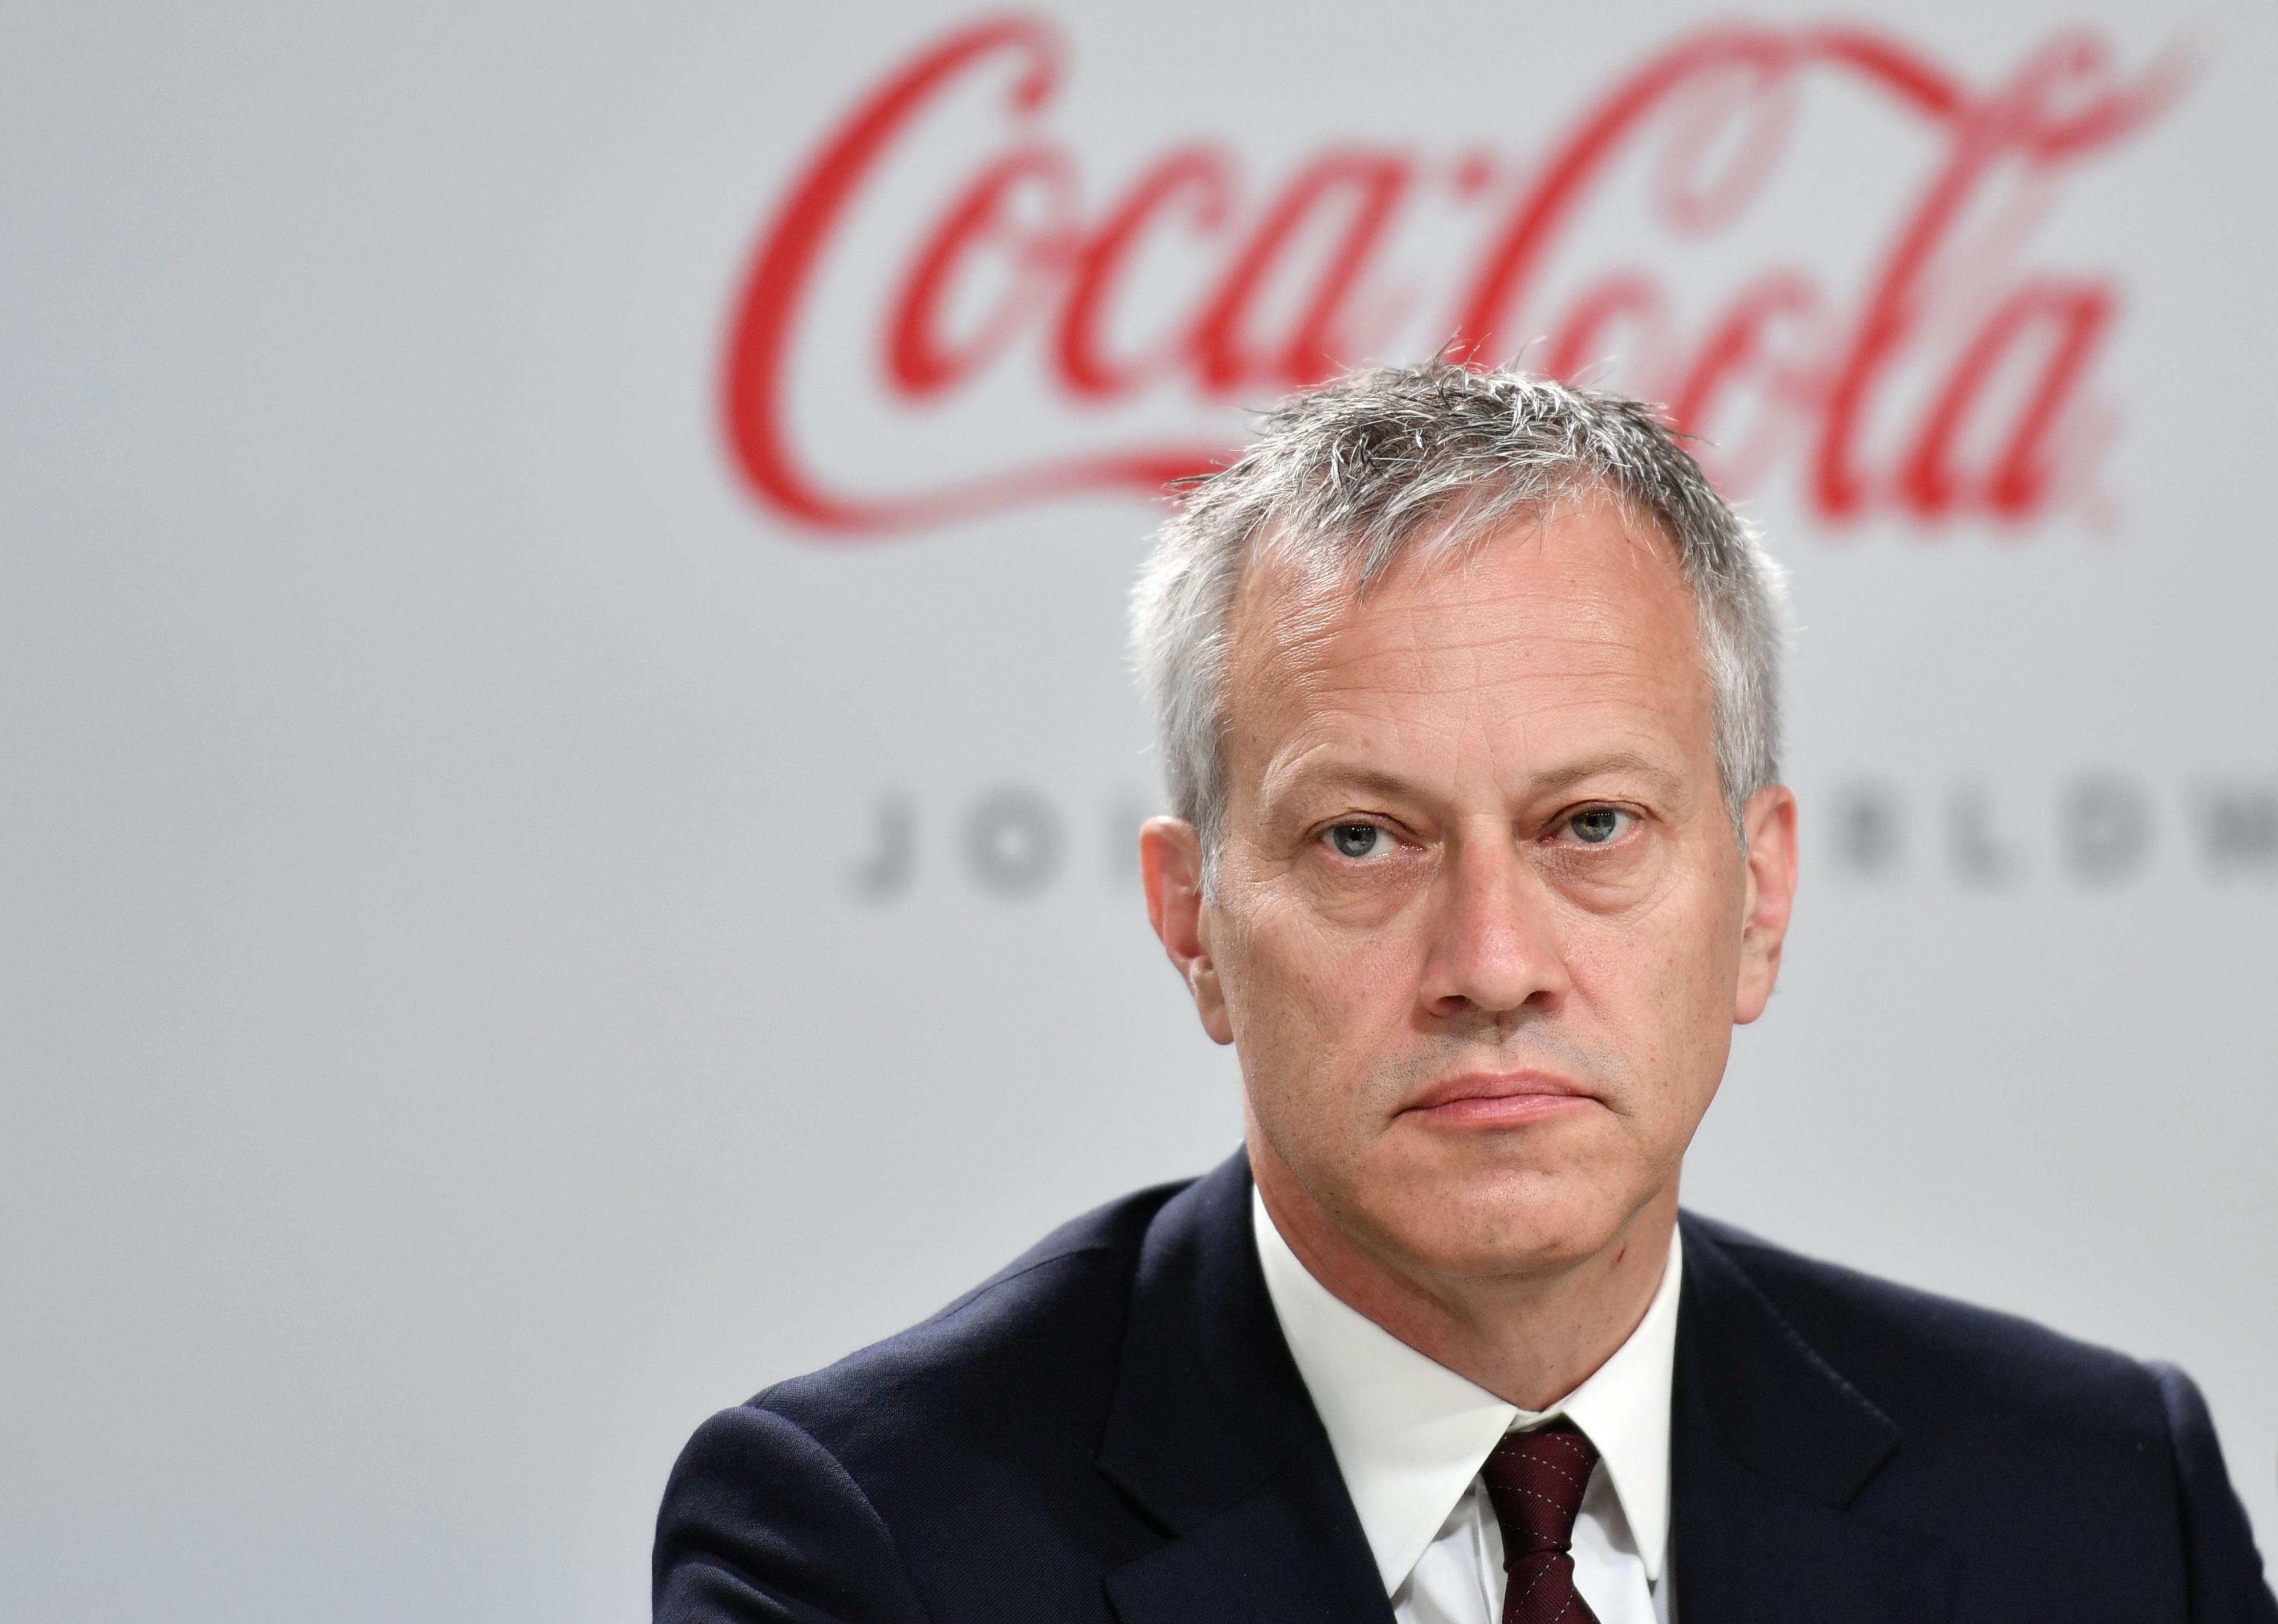 James Quincey in front of a Coca-Cola background.